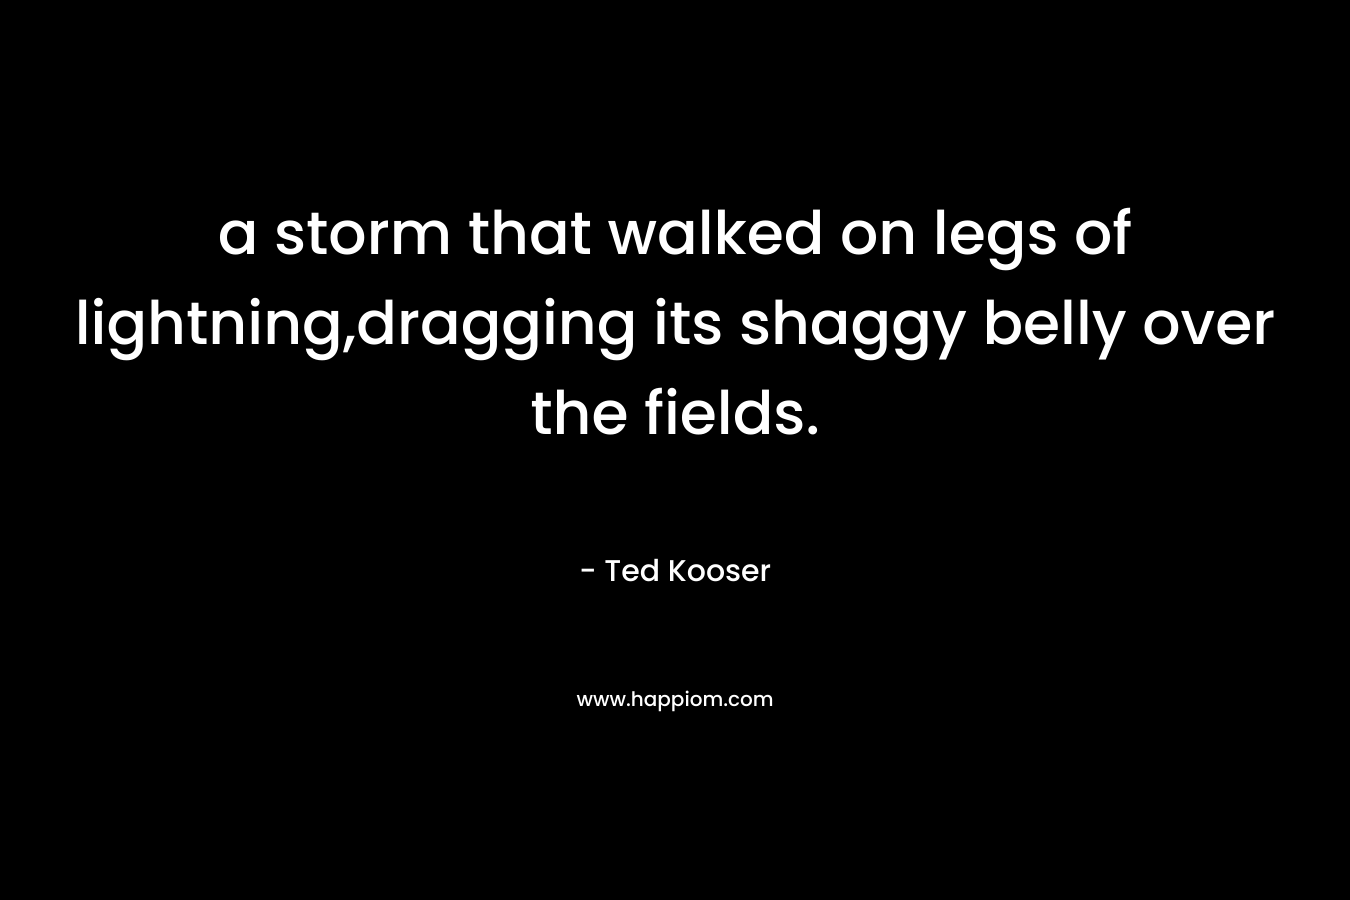 a storm that walked on legs of lightning,dragging its shaggy belly over the fields.